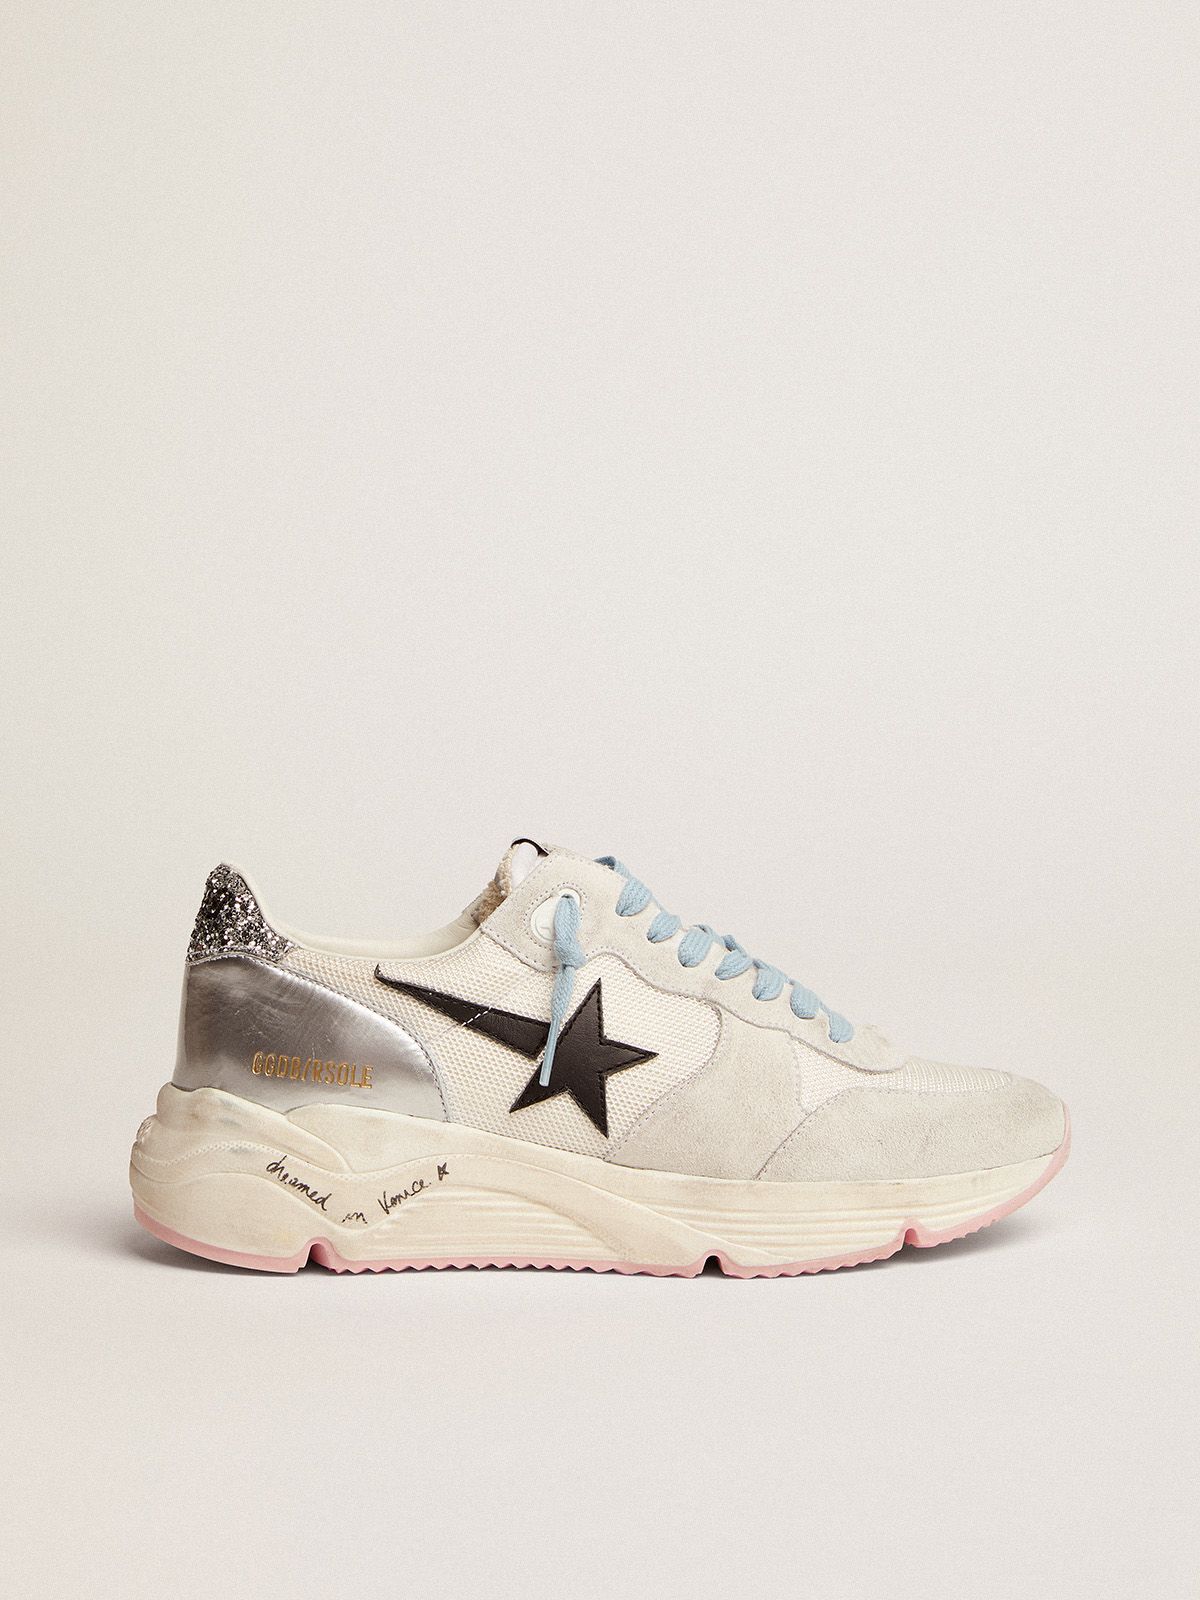 golden goose tab black Running heel white mesh with LTD sneakers leather and in suede Sole glitter silver star